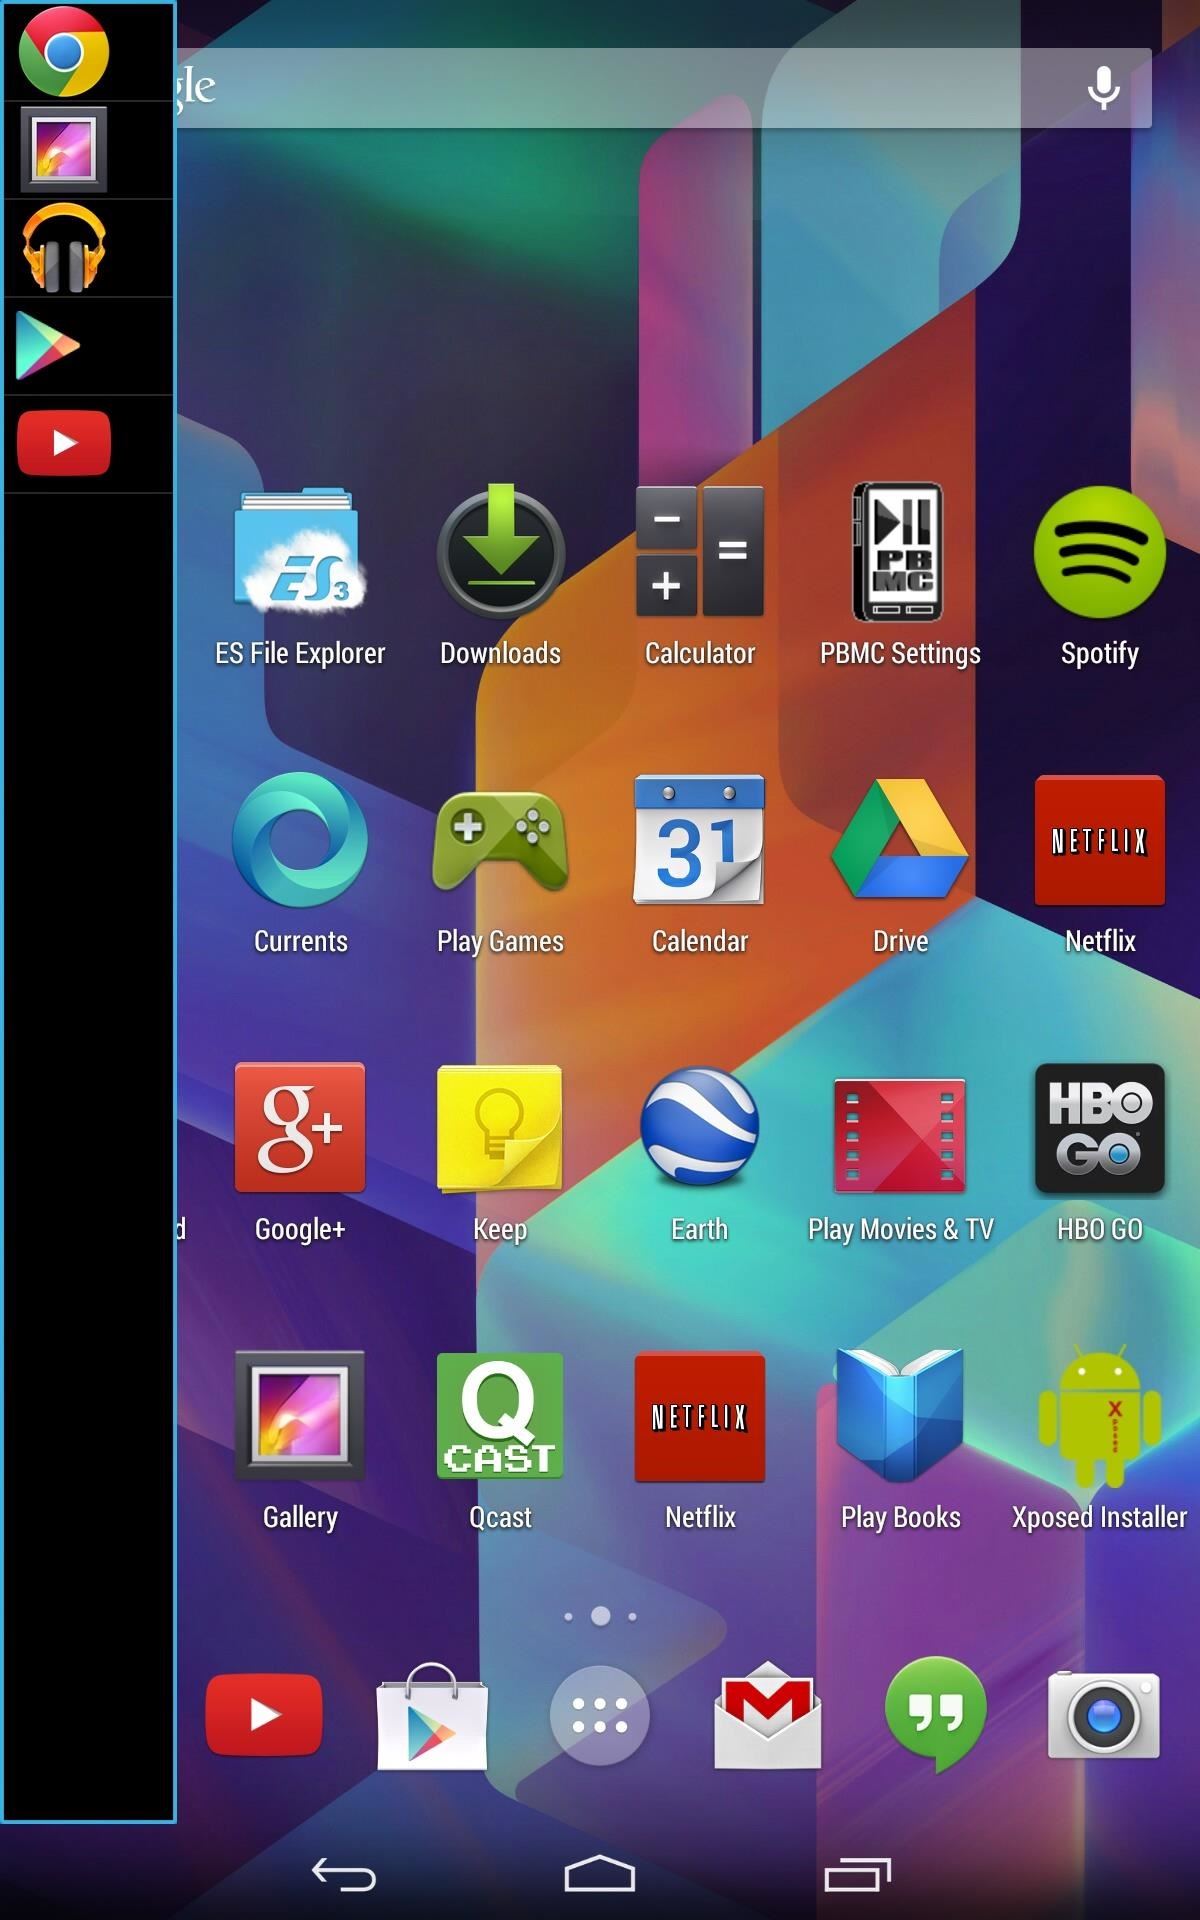 Split Screen Multitasking: How to Run 2 Apps in Separate Windows on Your Nexus 7 Simultaneously